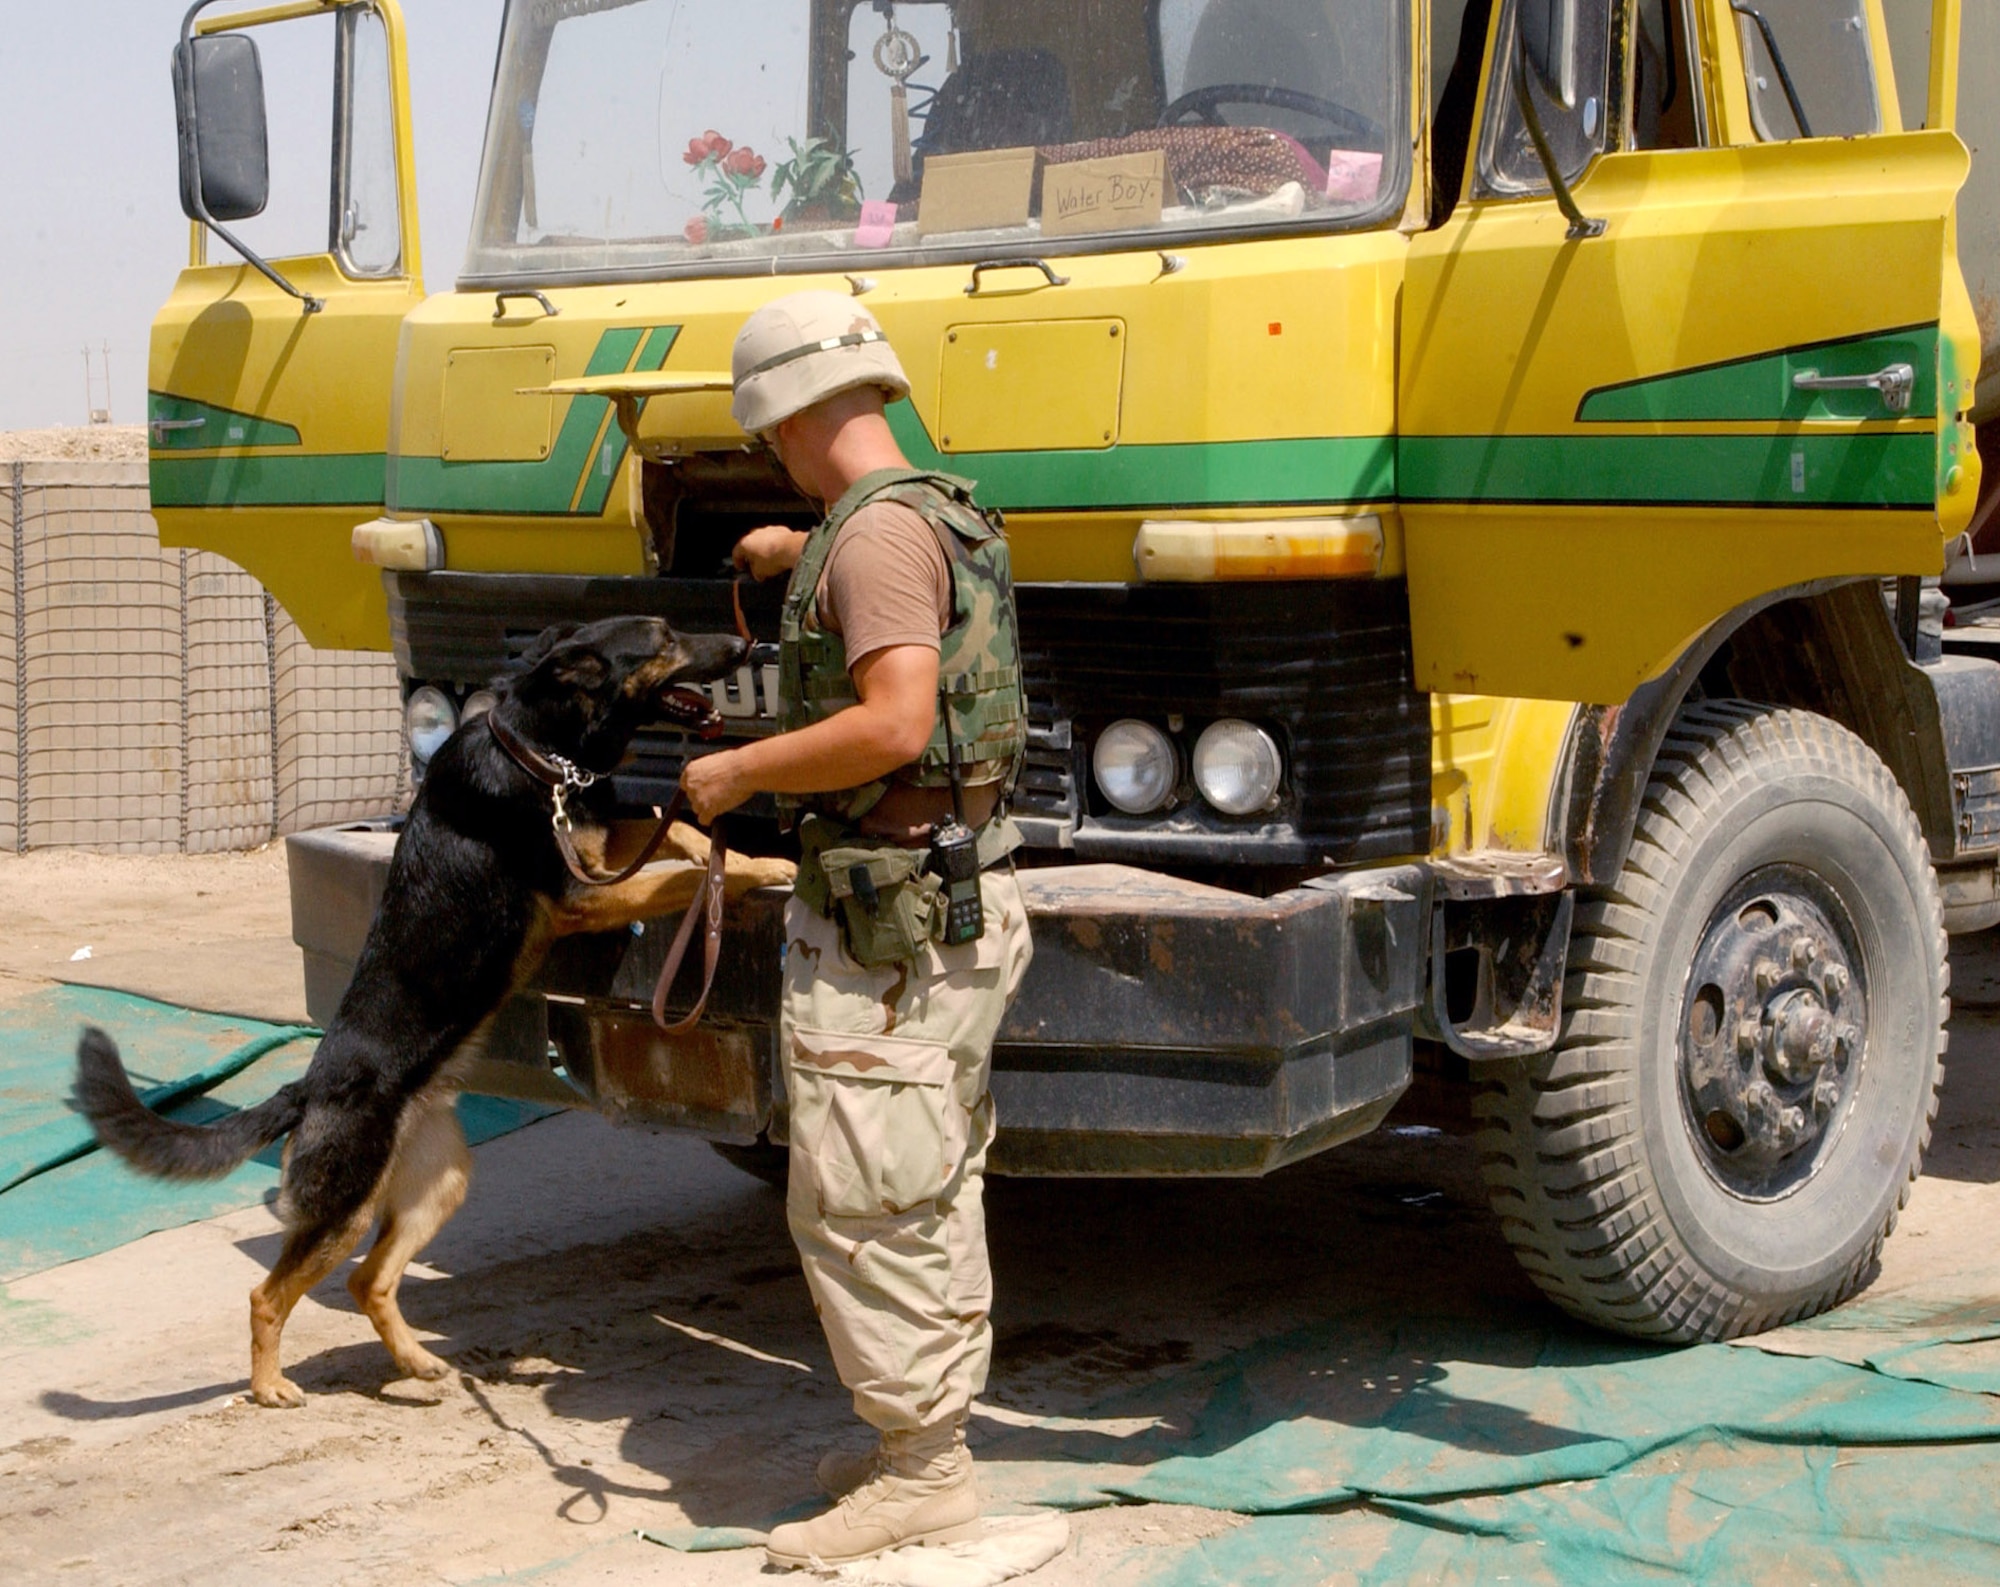 BAGHDAD, Iraq -- Staff Sgt. Dan Hartley, 447th Expeditionary Security Forces Squadron military working dog handler, and military working dog, Cody, check for explosives on a vehicle at a Baghdad International Airport checkpoint.  They are one of several military working dog teams here supporting Operation Iraqi Freedom.  Hartley and Cody are both deployed from the 66th Security Forces Squadron at Hanscom Air Force Base, Mass.  (U.S. Air Force photo by Airman 1st Class Brian Ferguson)